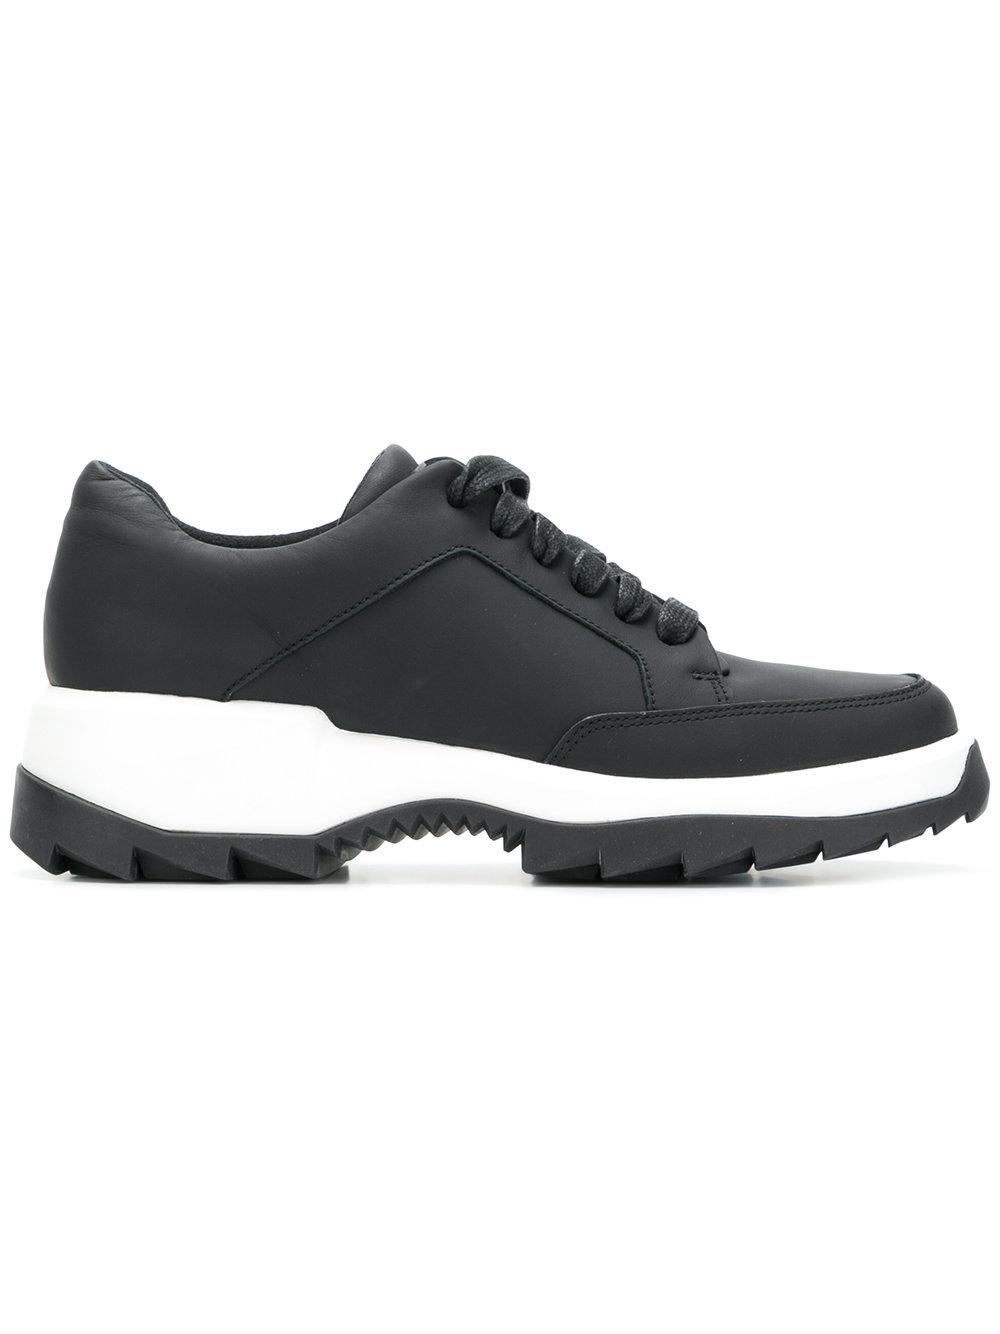 Camper Helix Lace-Up Sneakers - Black | ModeSens